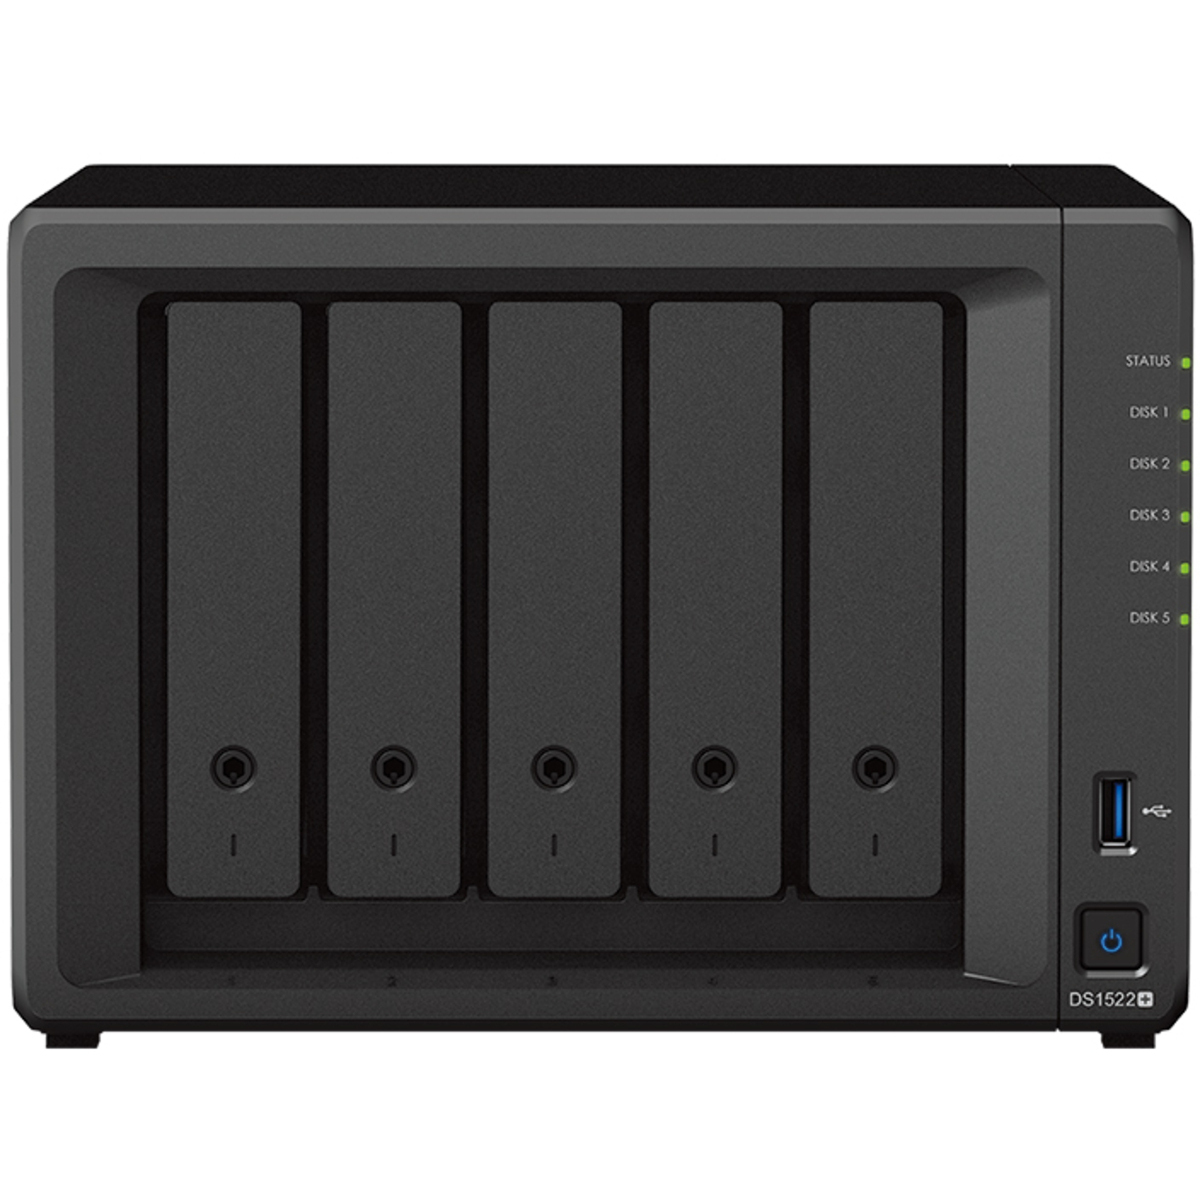 Synology DiskStation DS1522+ 88tb 5-Bay Desktop Multimedia / Power User / Business NAS - Network Attached Storage Device 4x22tb Seagate EXOS X22 ST22000NM001E 3.5 7200rpm SATA 6Gb/s HDD ENTERPRISE Class Drives Installed - Burn-In Tested - ON SALE DiskStation DS1522+